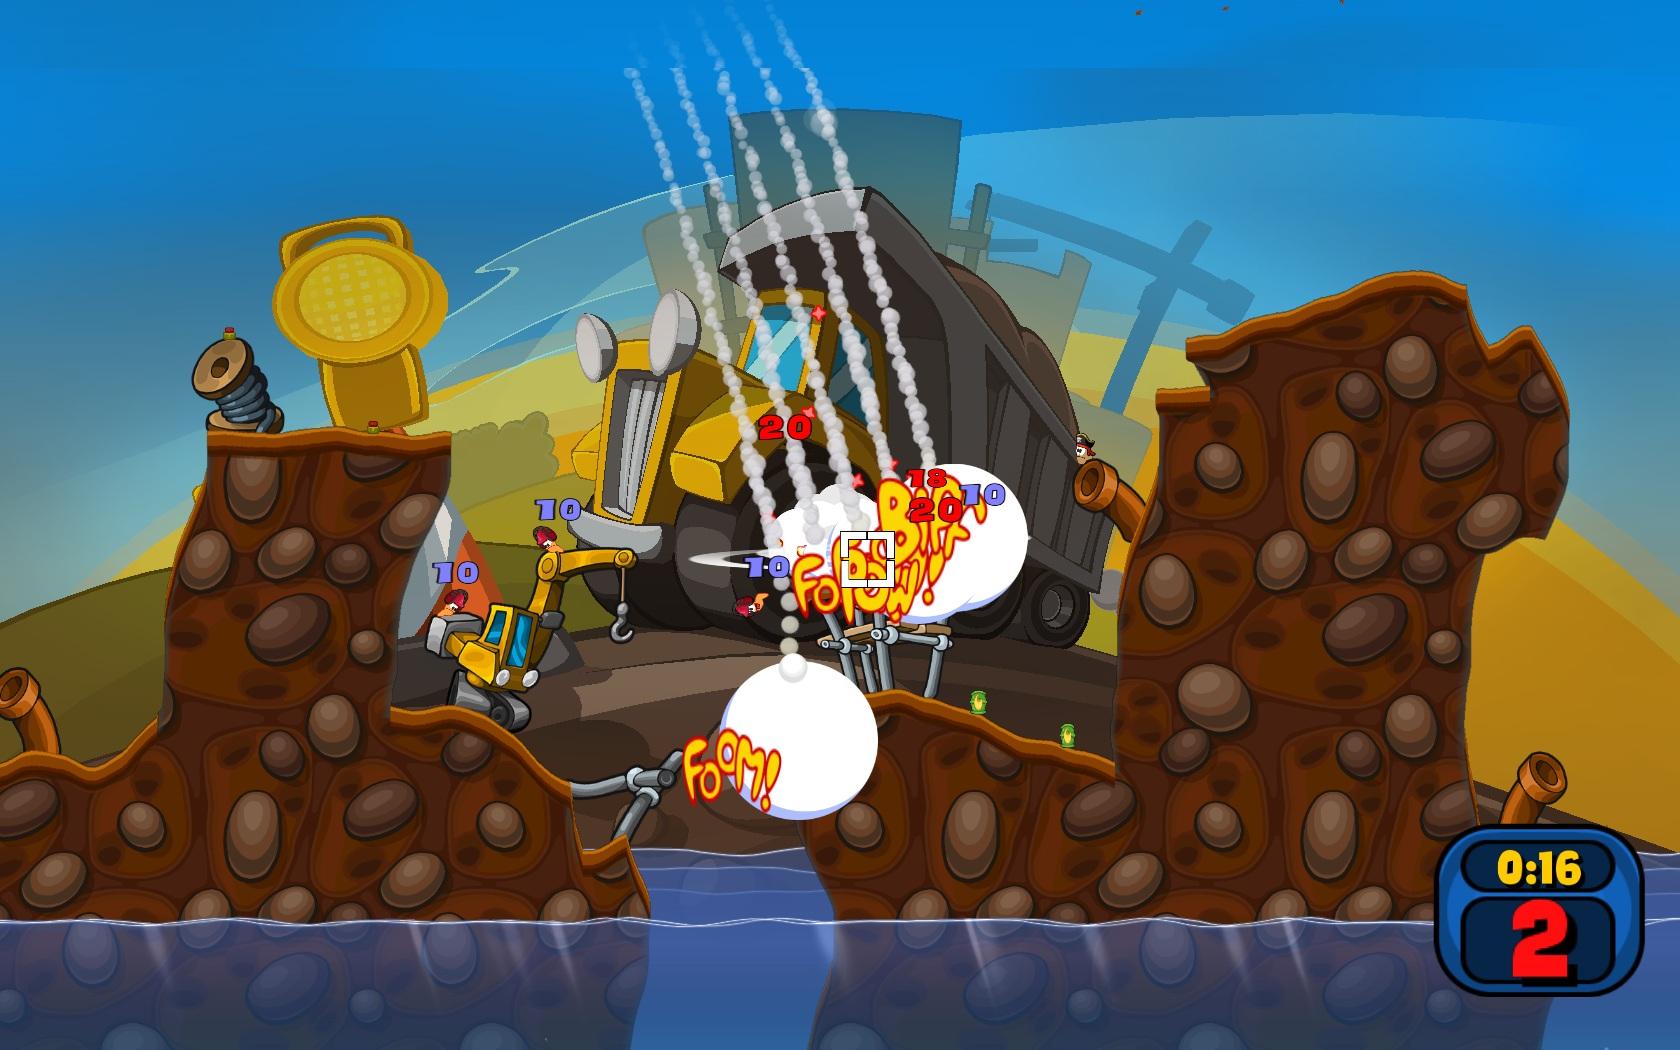 download worms reloaded pc for free